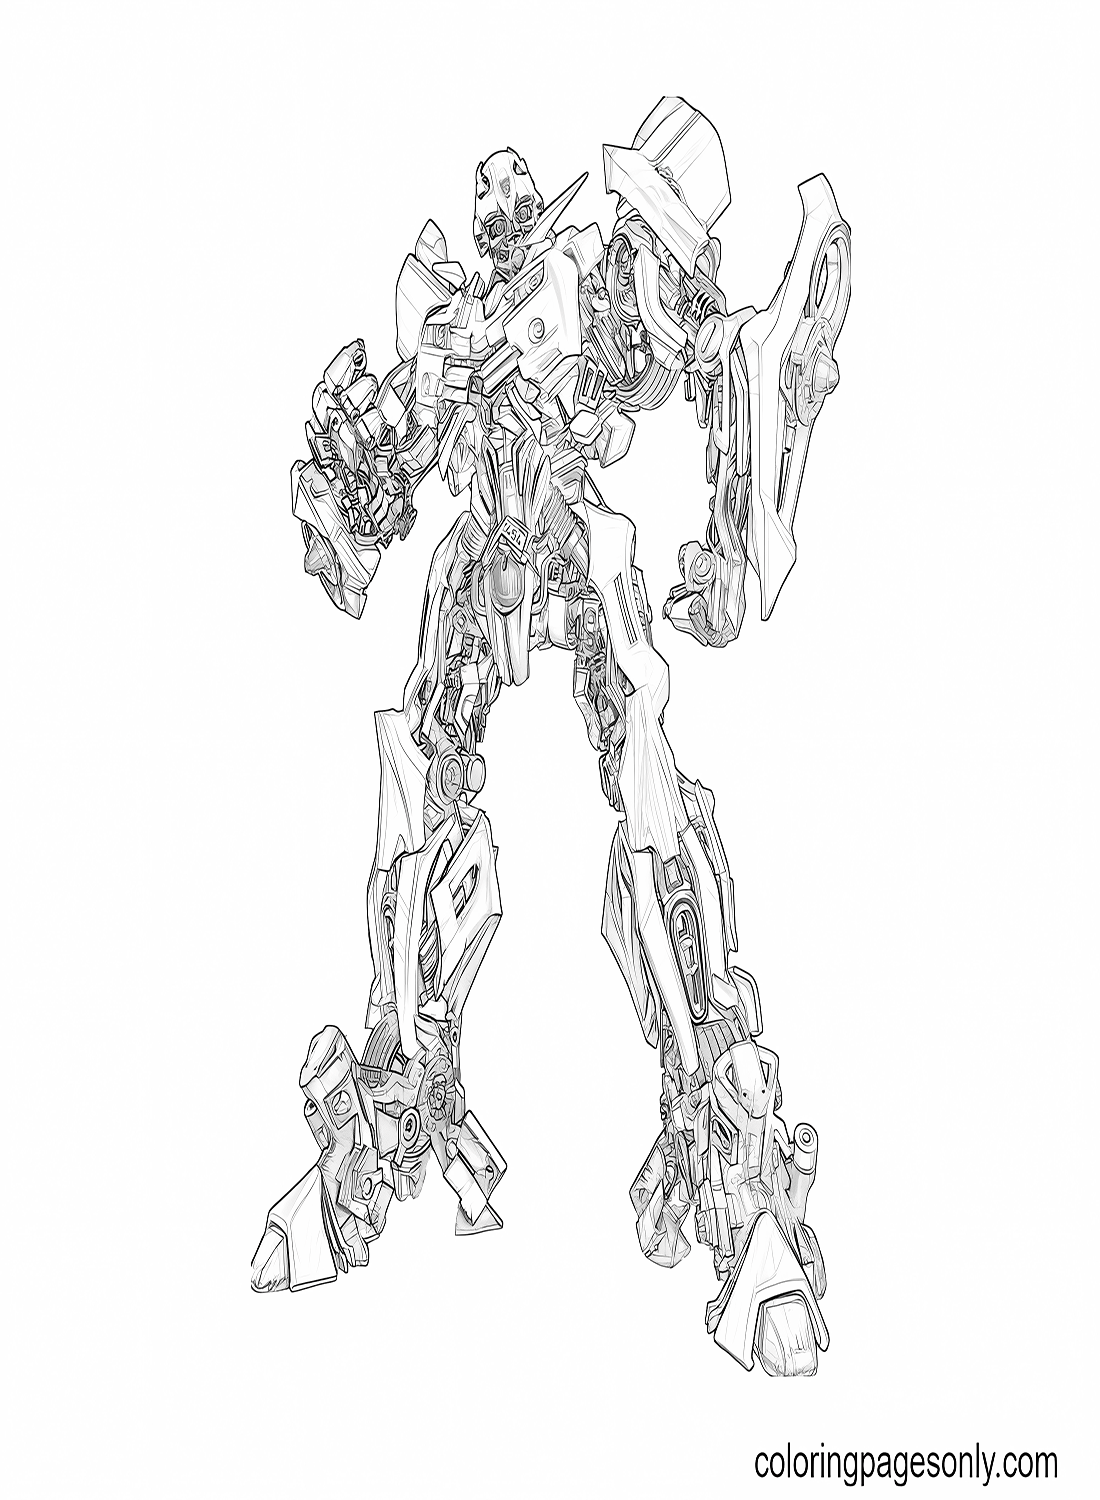 Transformers Bumblebee Printable Coloring Pages